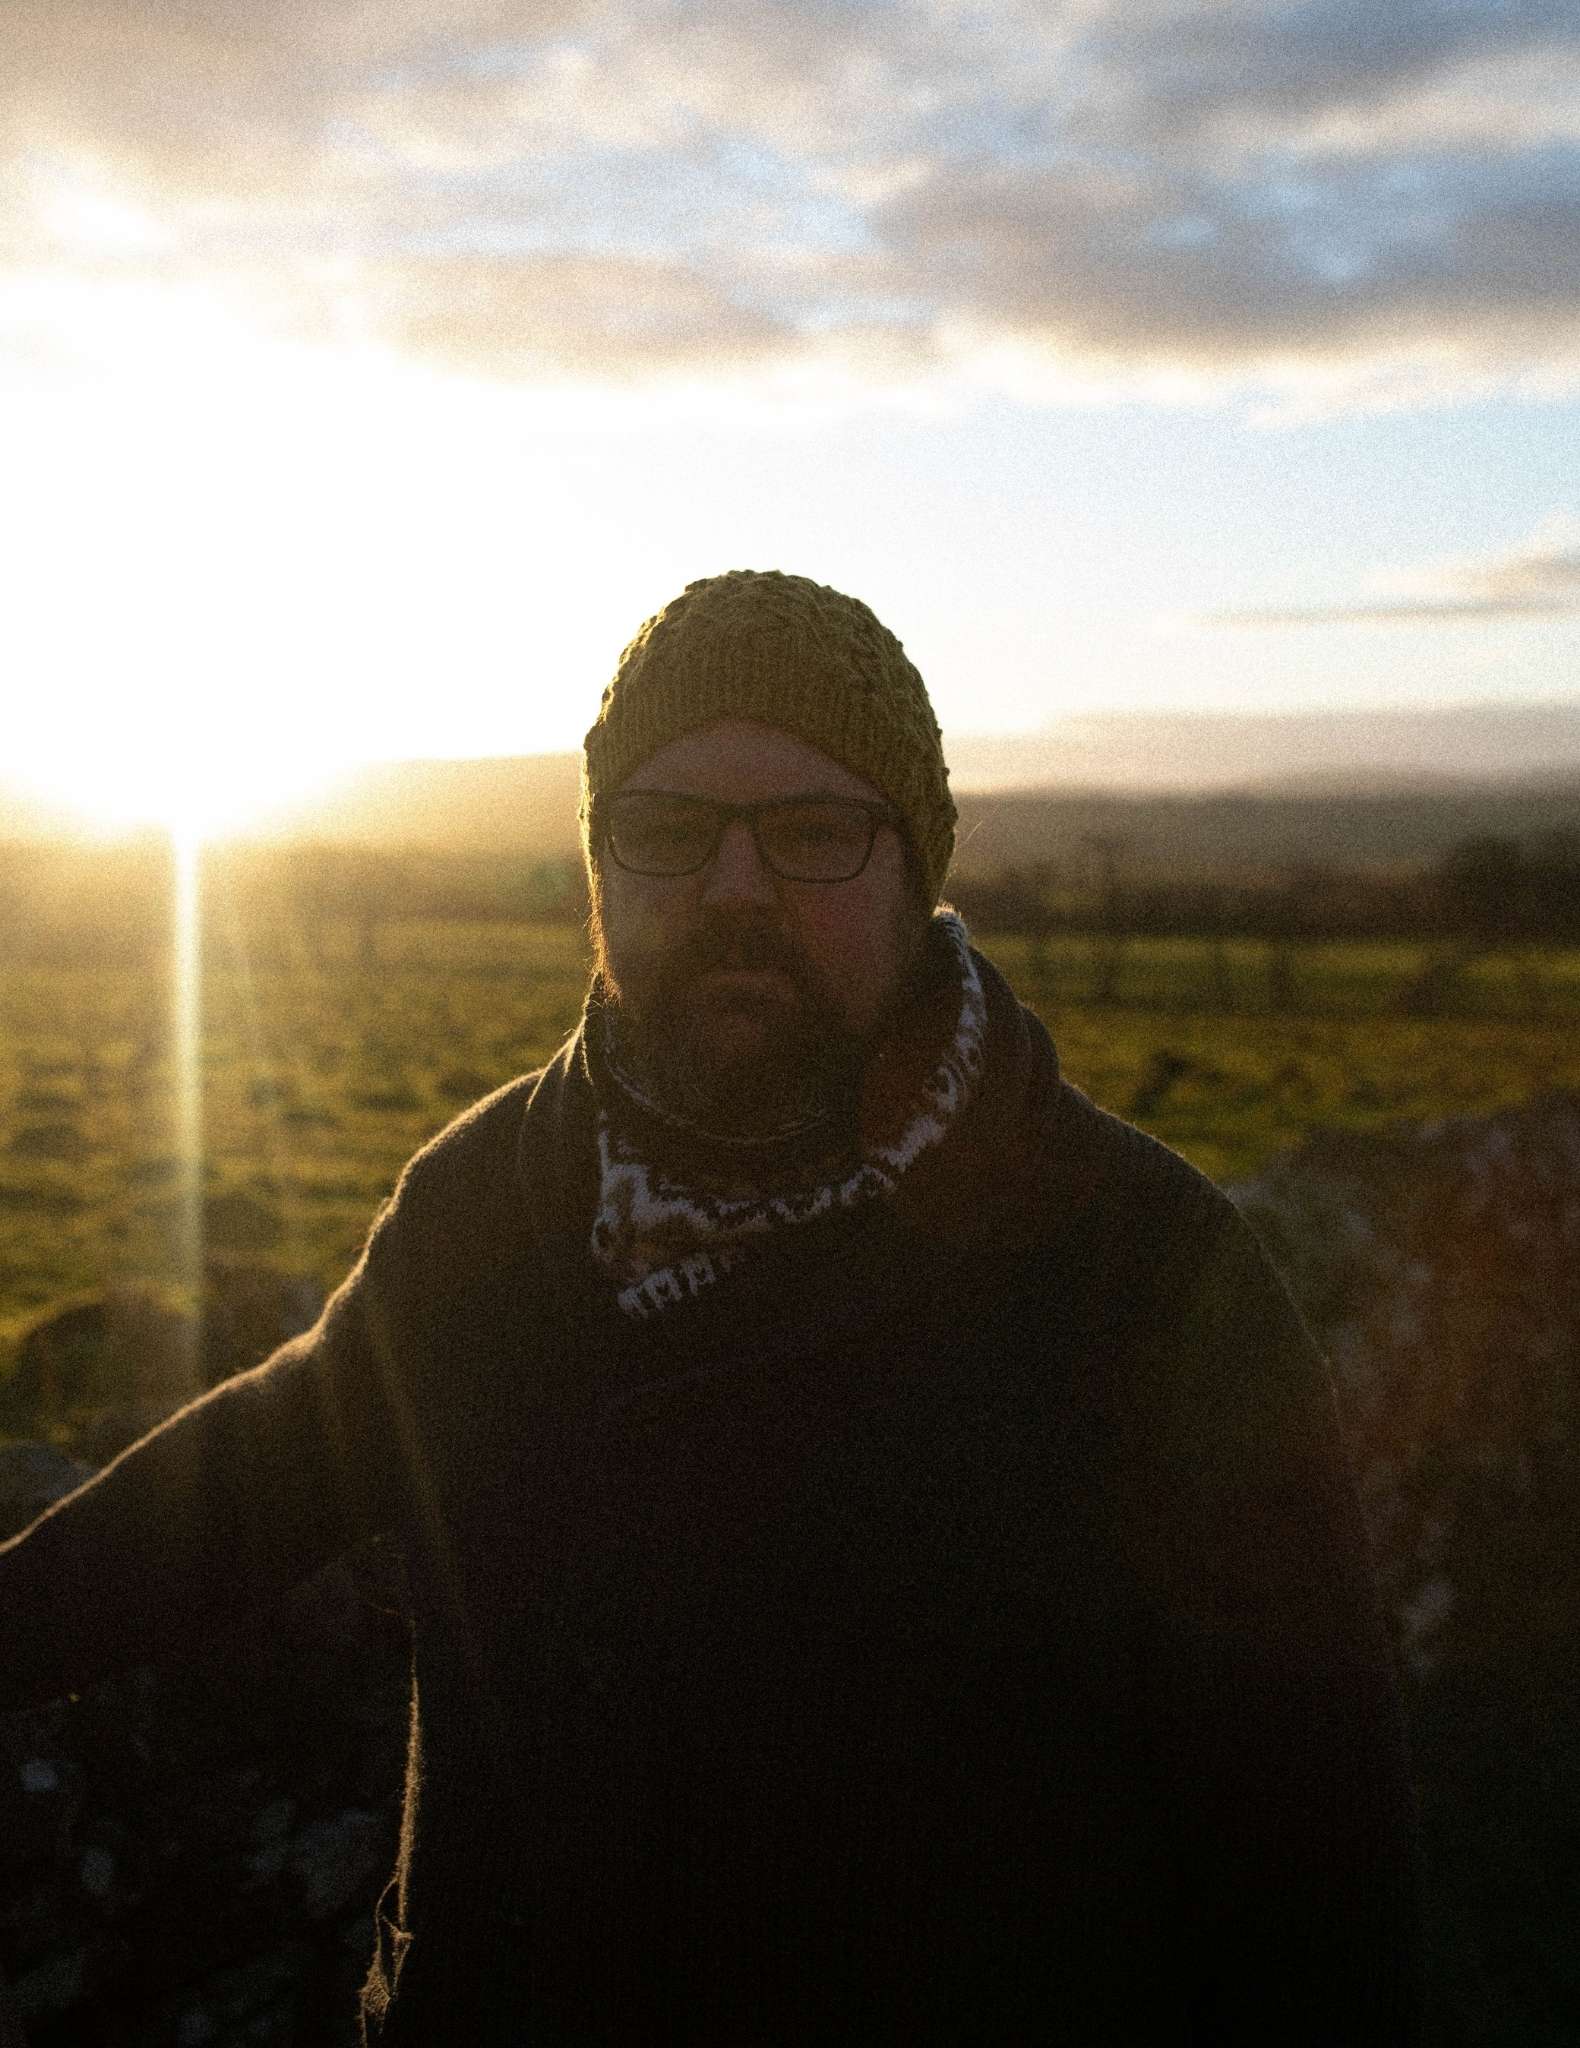 an under exposed, and dark photo of a man with a beard and glasses standing in a field with the sun behind. The photo is so dark that few details are visible.